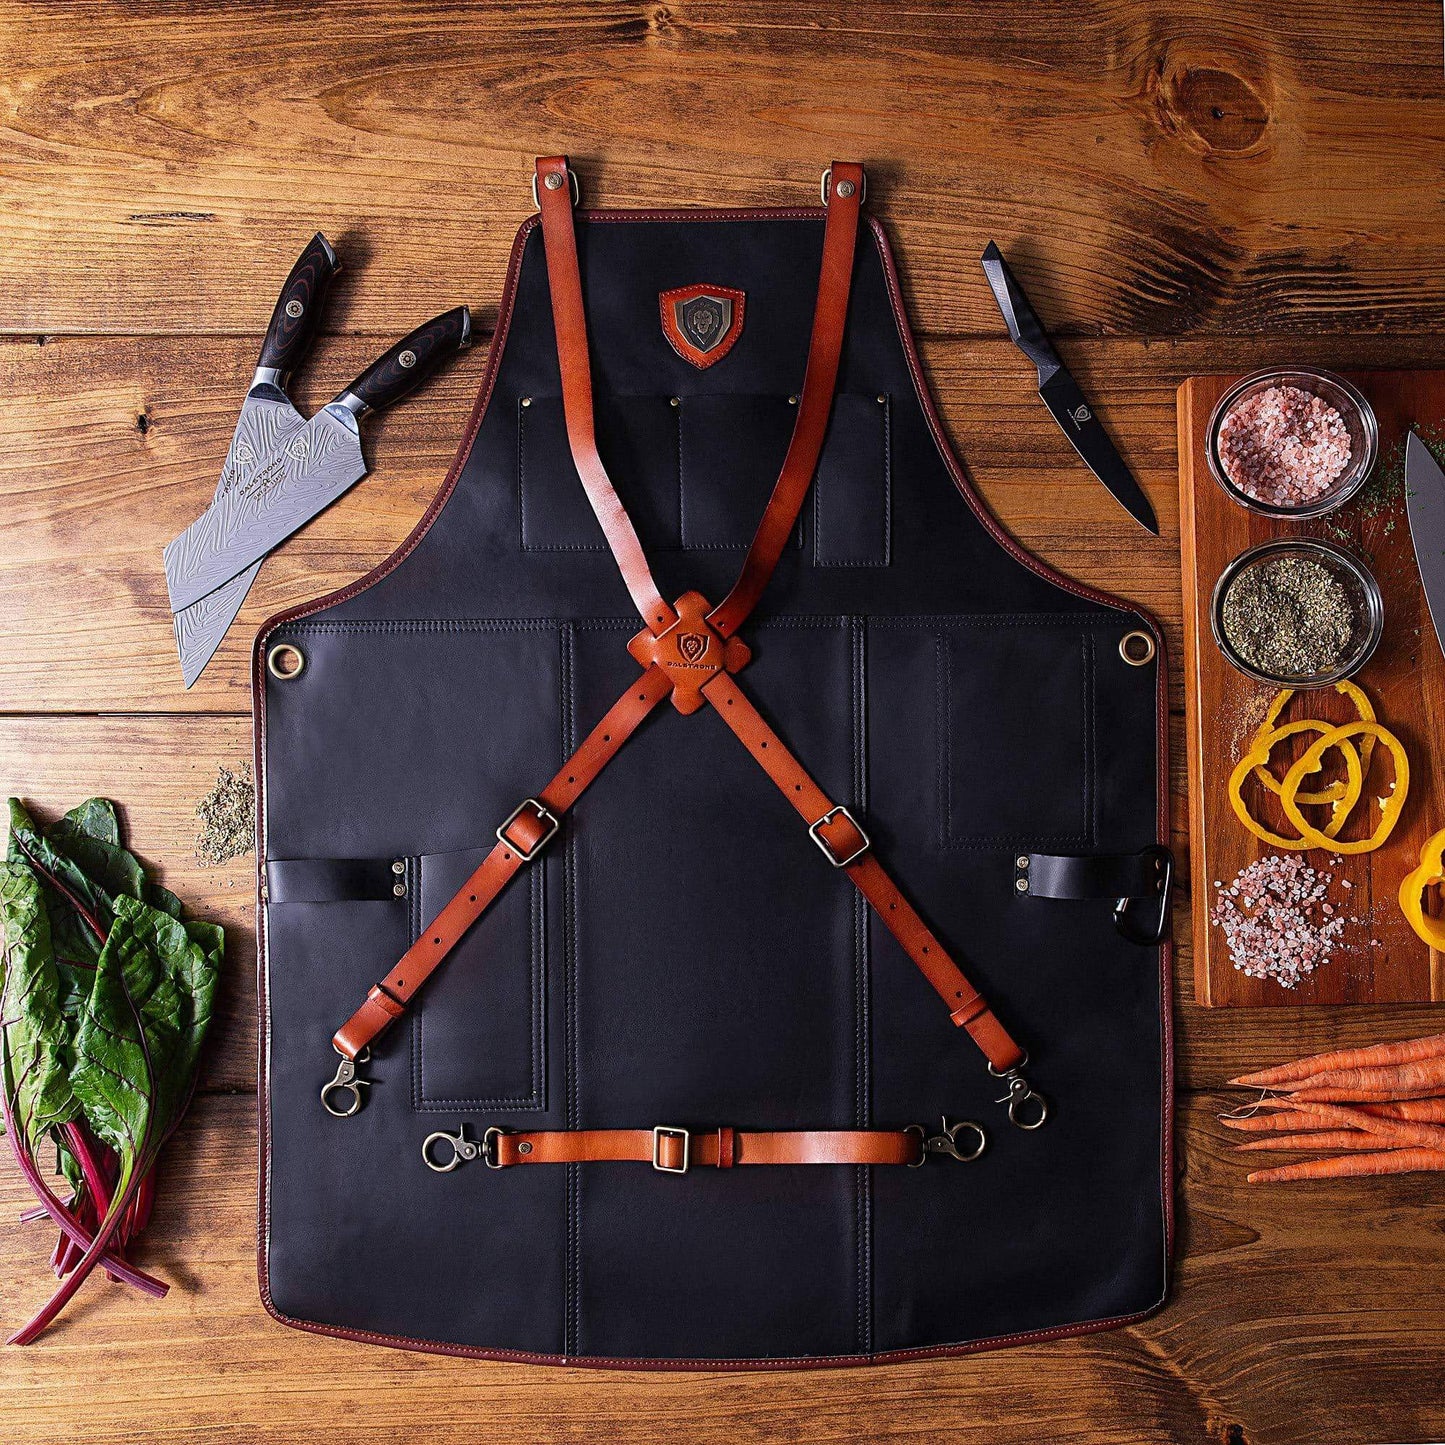 Amazon dalstrong professional chefs kitchen apron the culinary commander top grain leather 5 storage pockets towel tong loop fully adjustable harness straps heavy duty